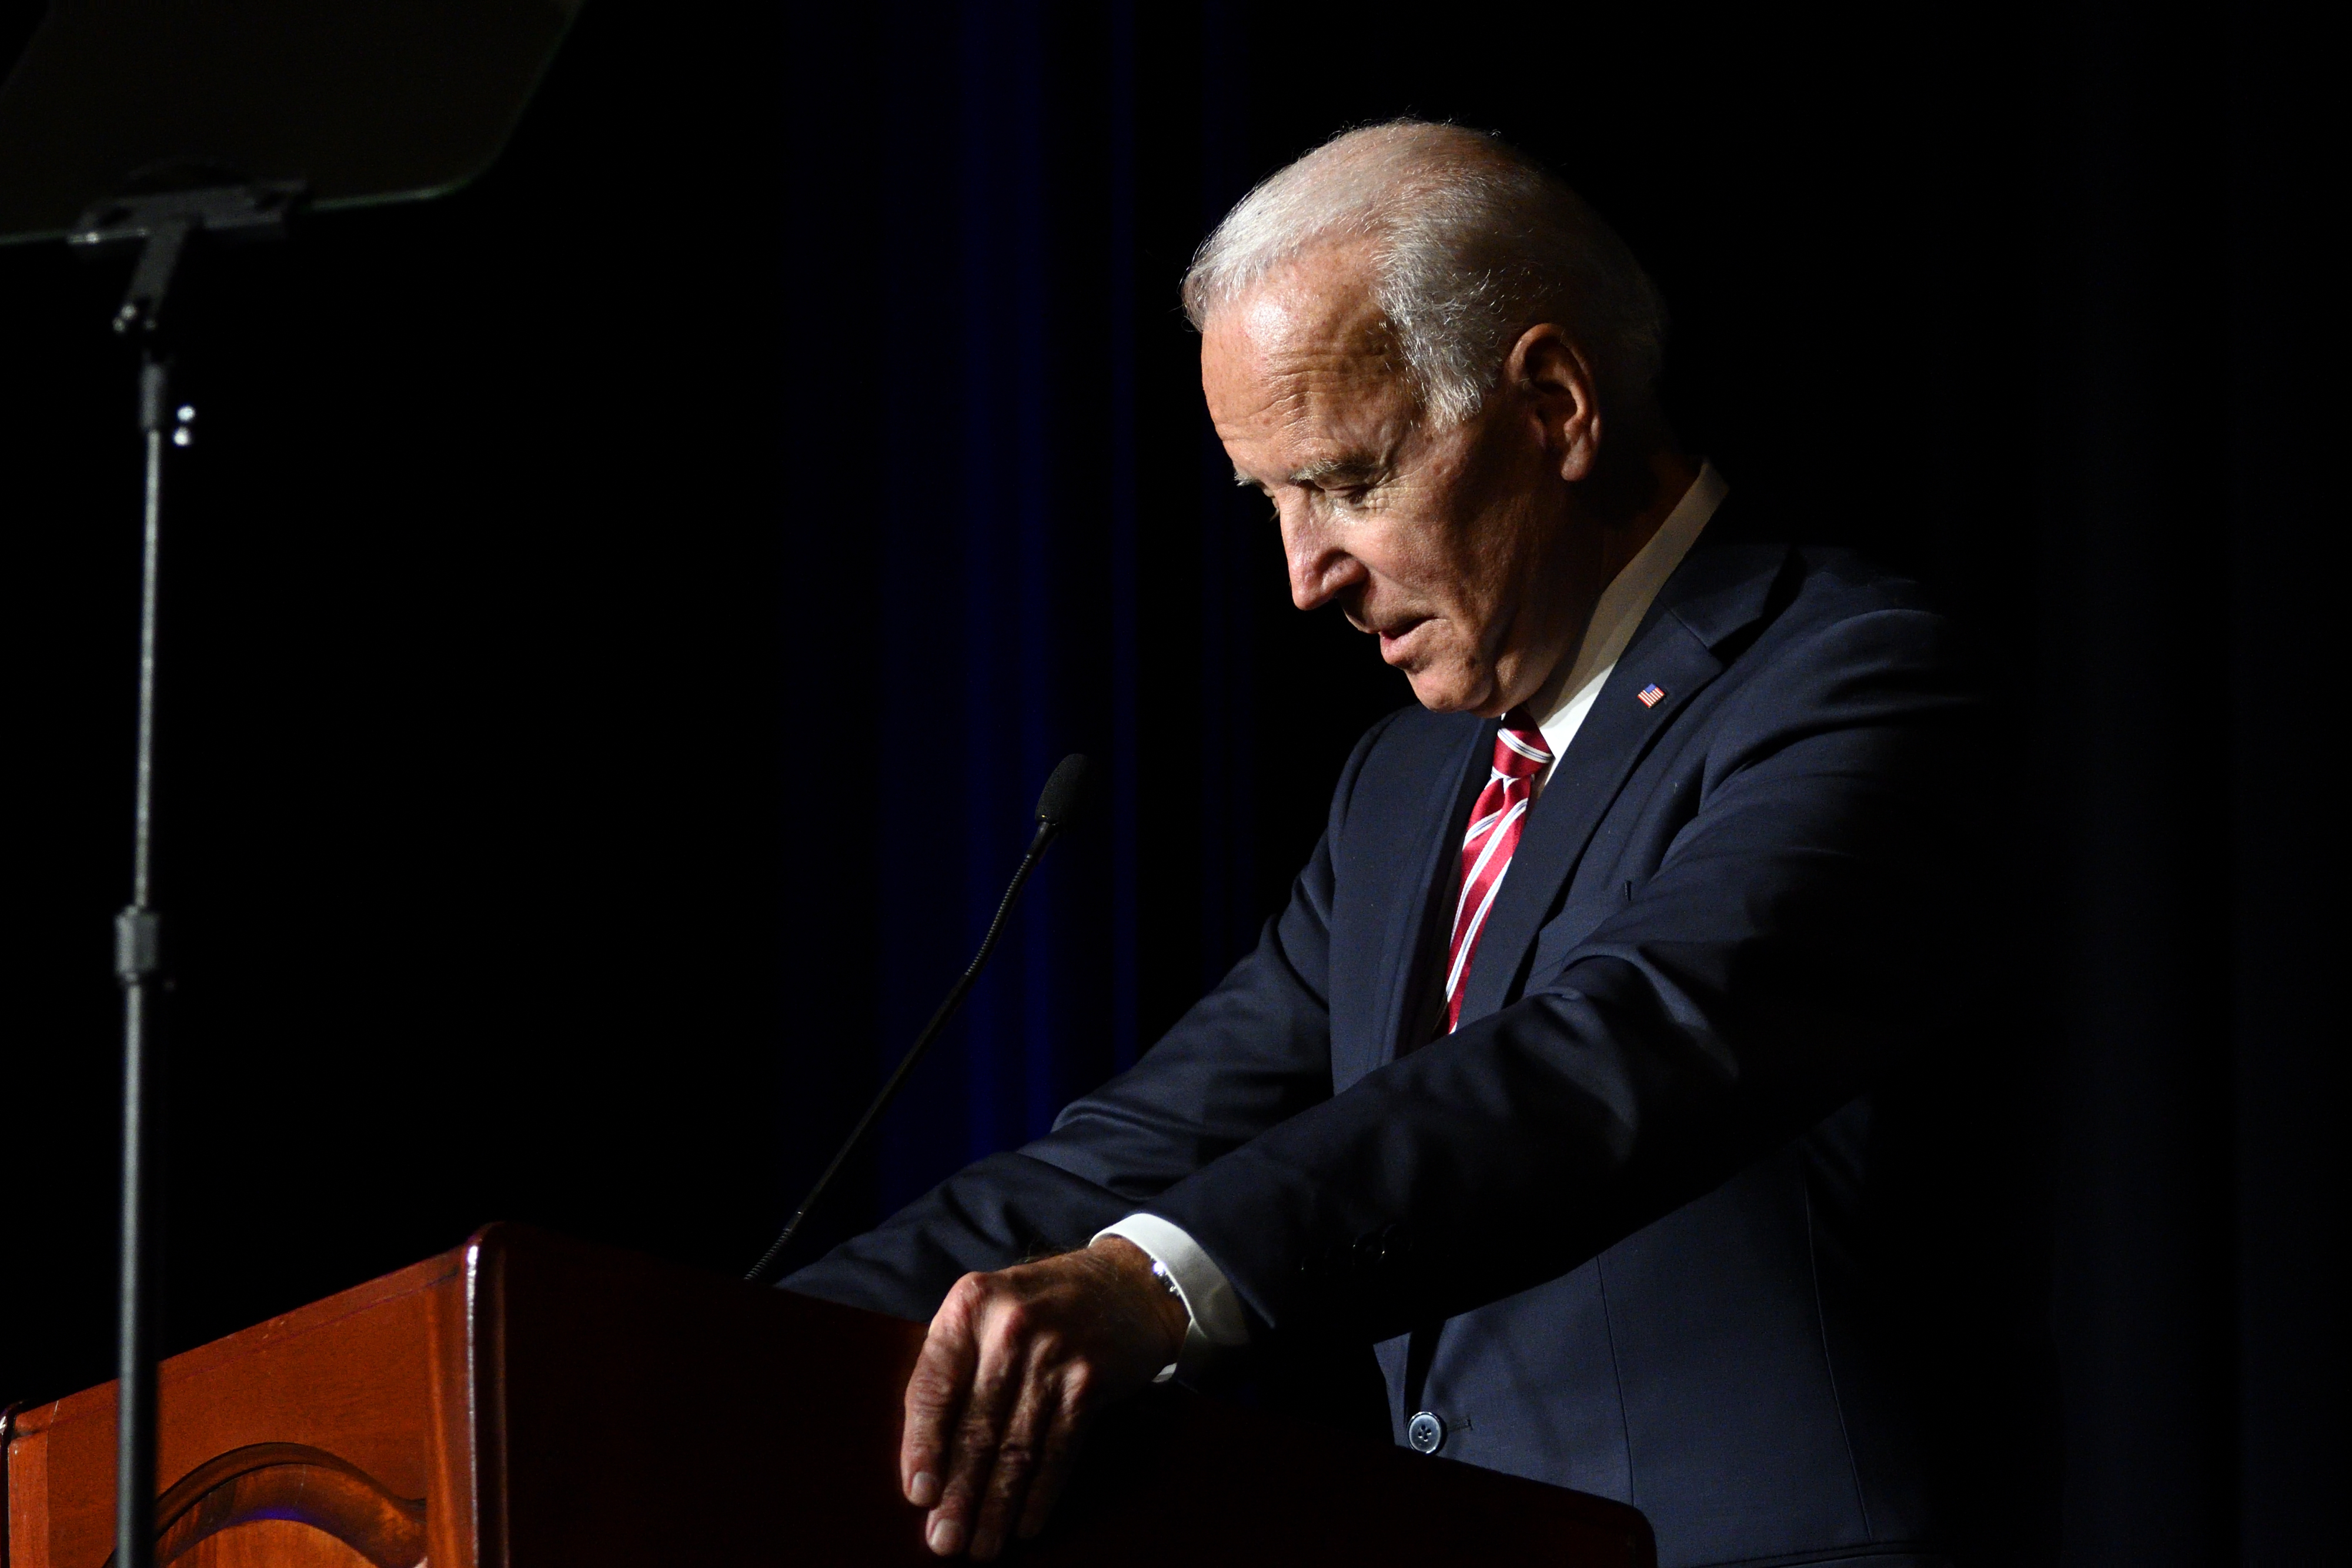 Joe Biden Expresses Regret to Anita Hill, but She Says 'I'm Sorry' Is Not  Enough - The New York Times